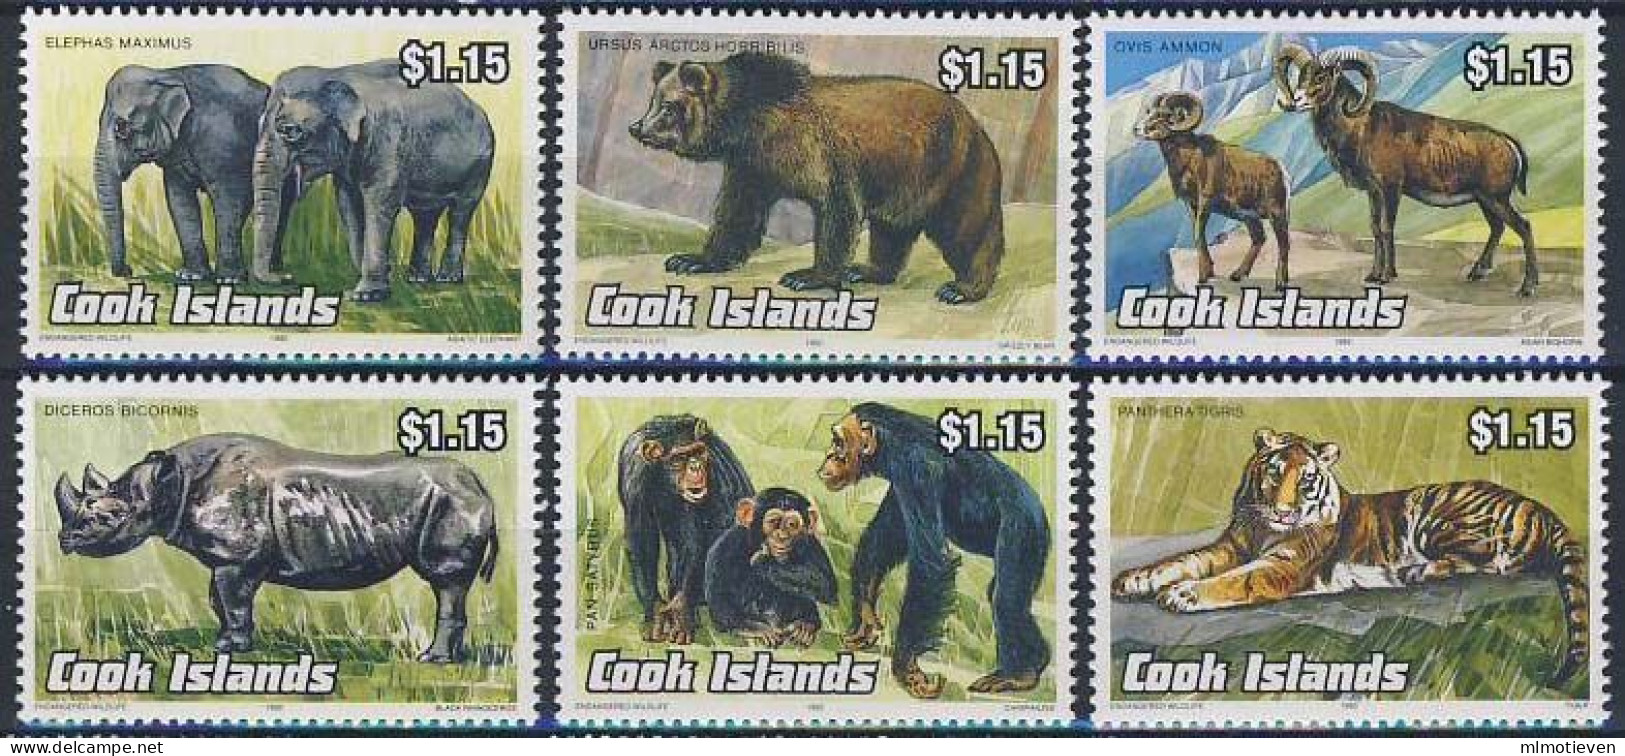 MDA-BK1-387 MINT PF/MNH ¤ COOK ISLANDS 1992 6w In Serie ¤ MAMMALS - ELEPHANTS - APES - BEARS - TIGRIS - AND OTHER - Animalez De Caza